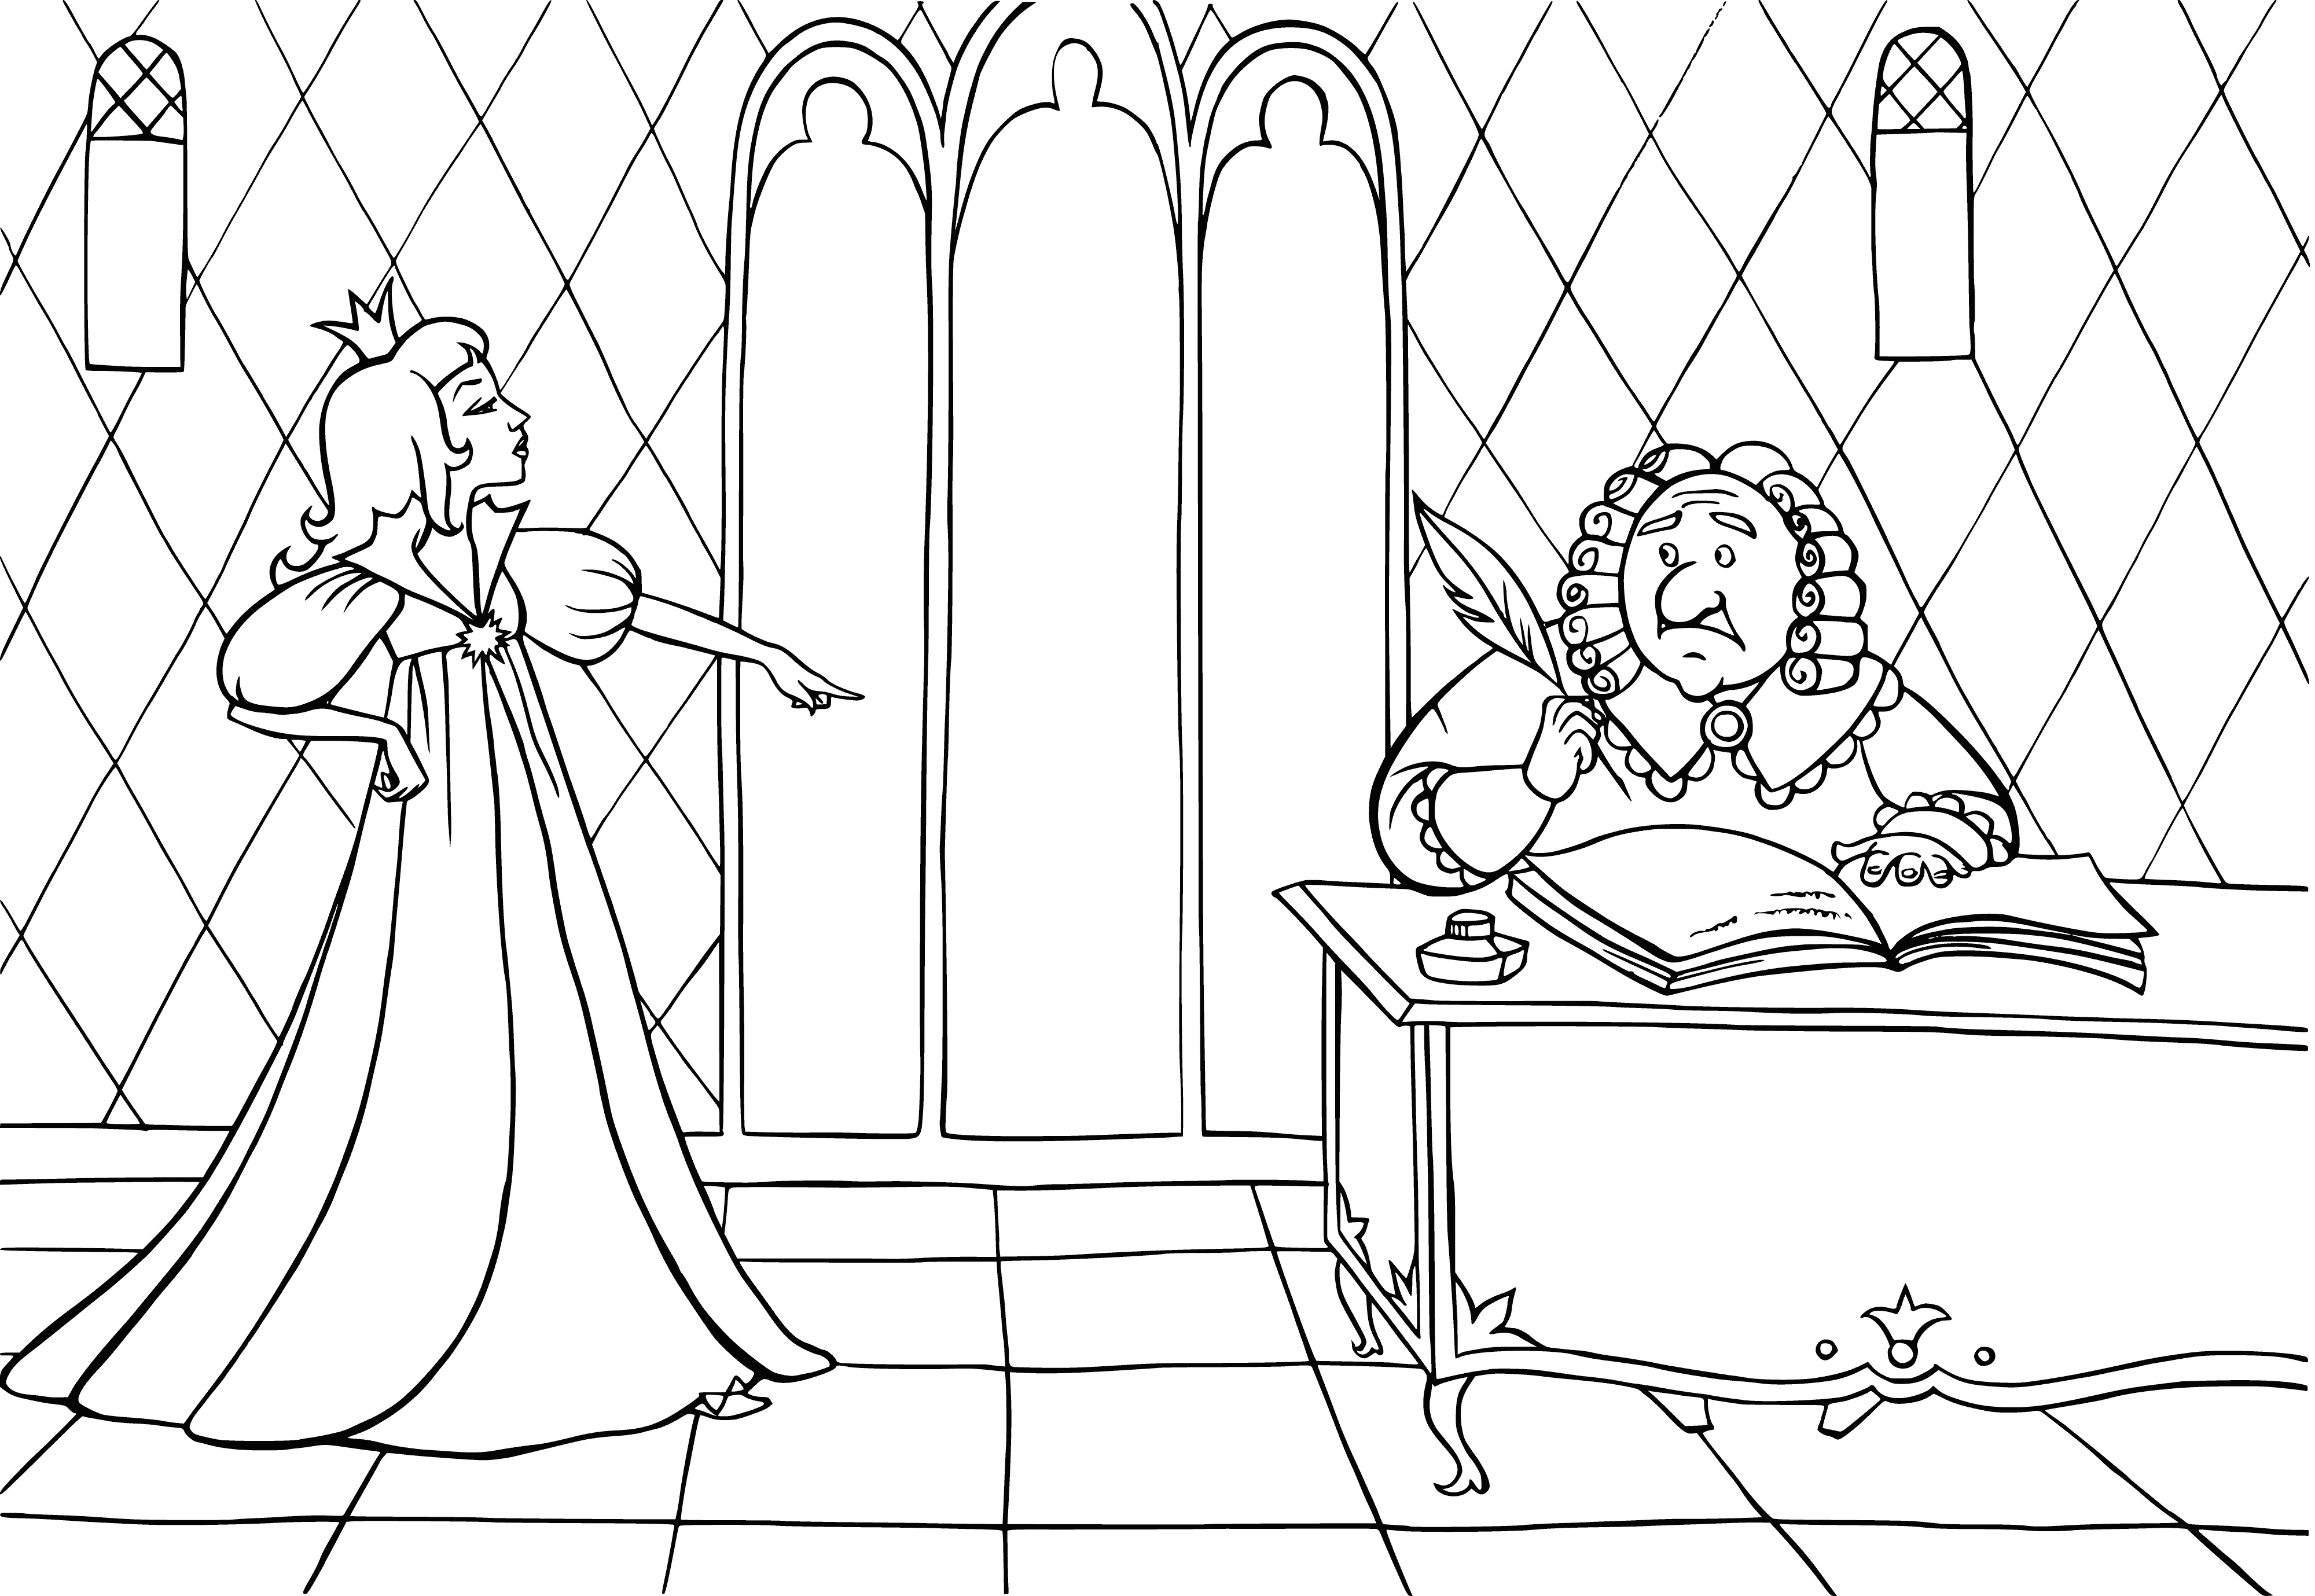 coloring page: A kingdom of fairies and colorful houses, with a grand castle in the center. Mountains, trees, and a lake surround the magical realm full of fairies flying and sitting on flowers.